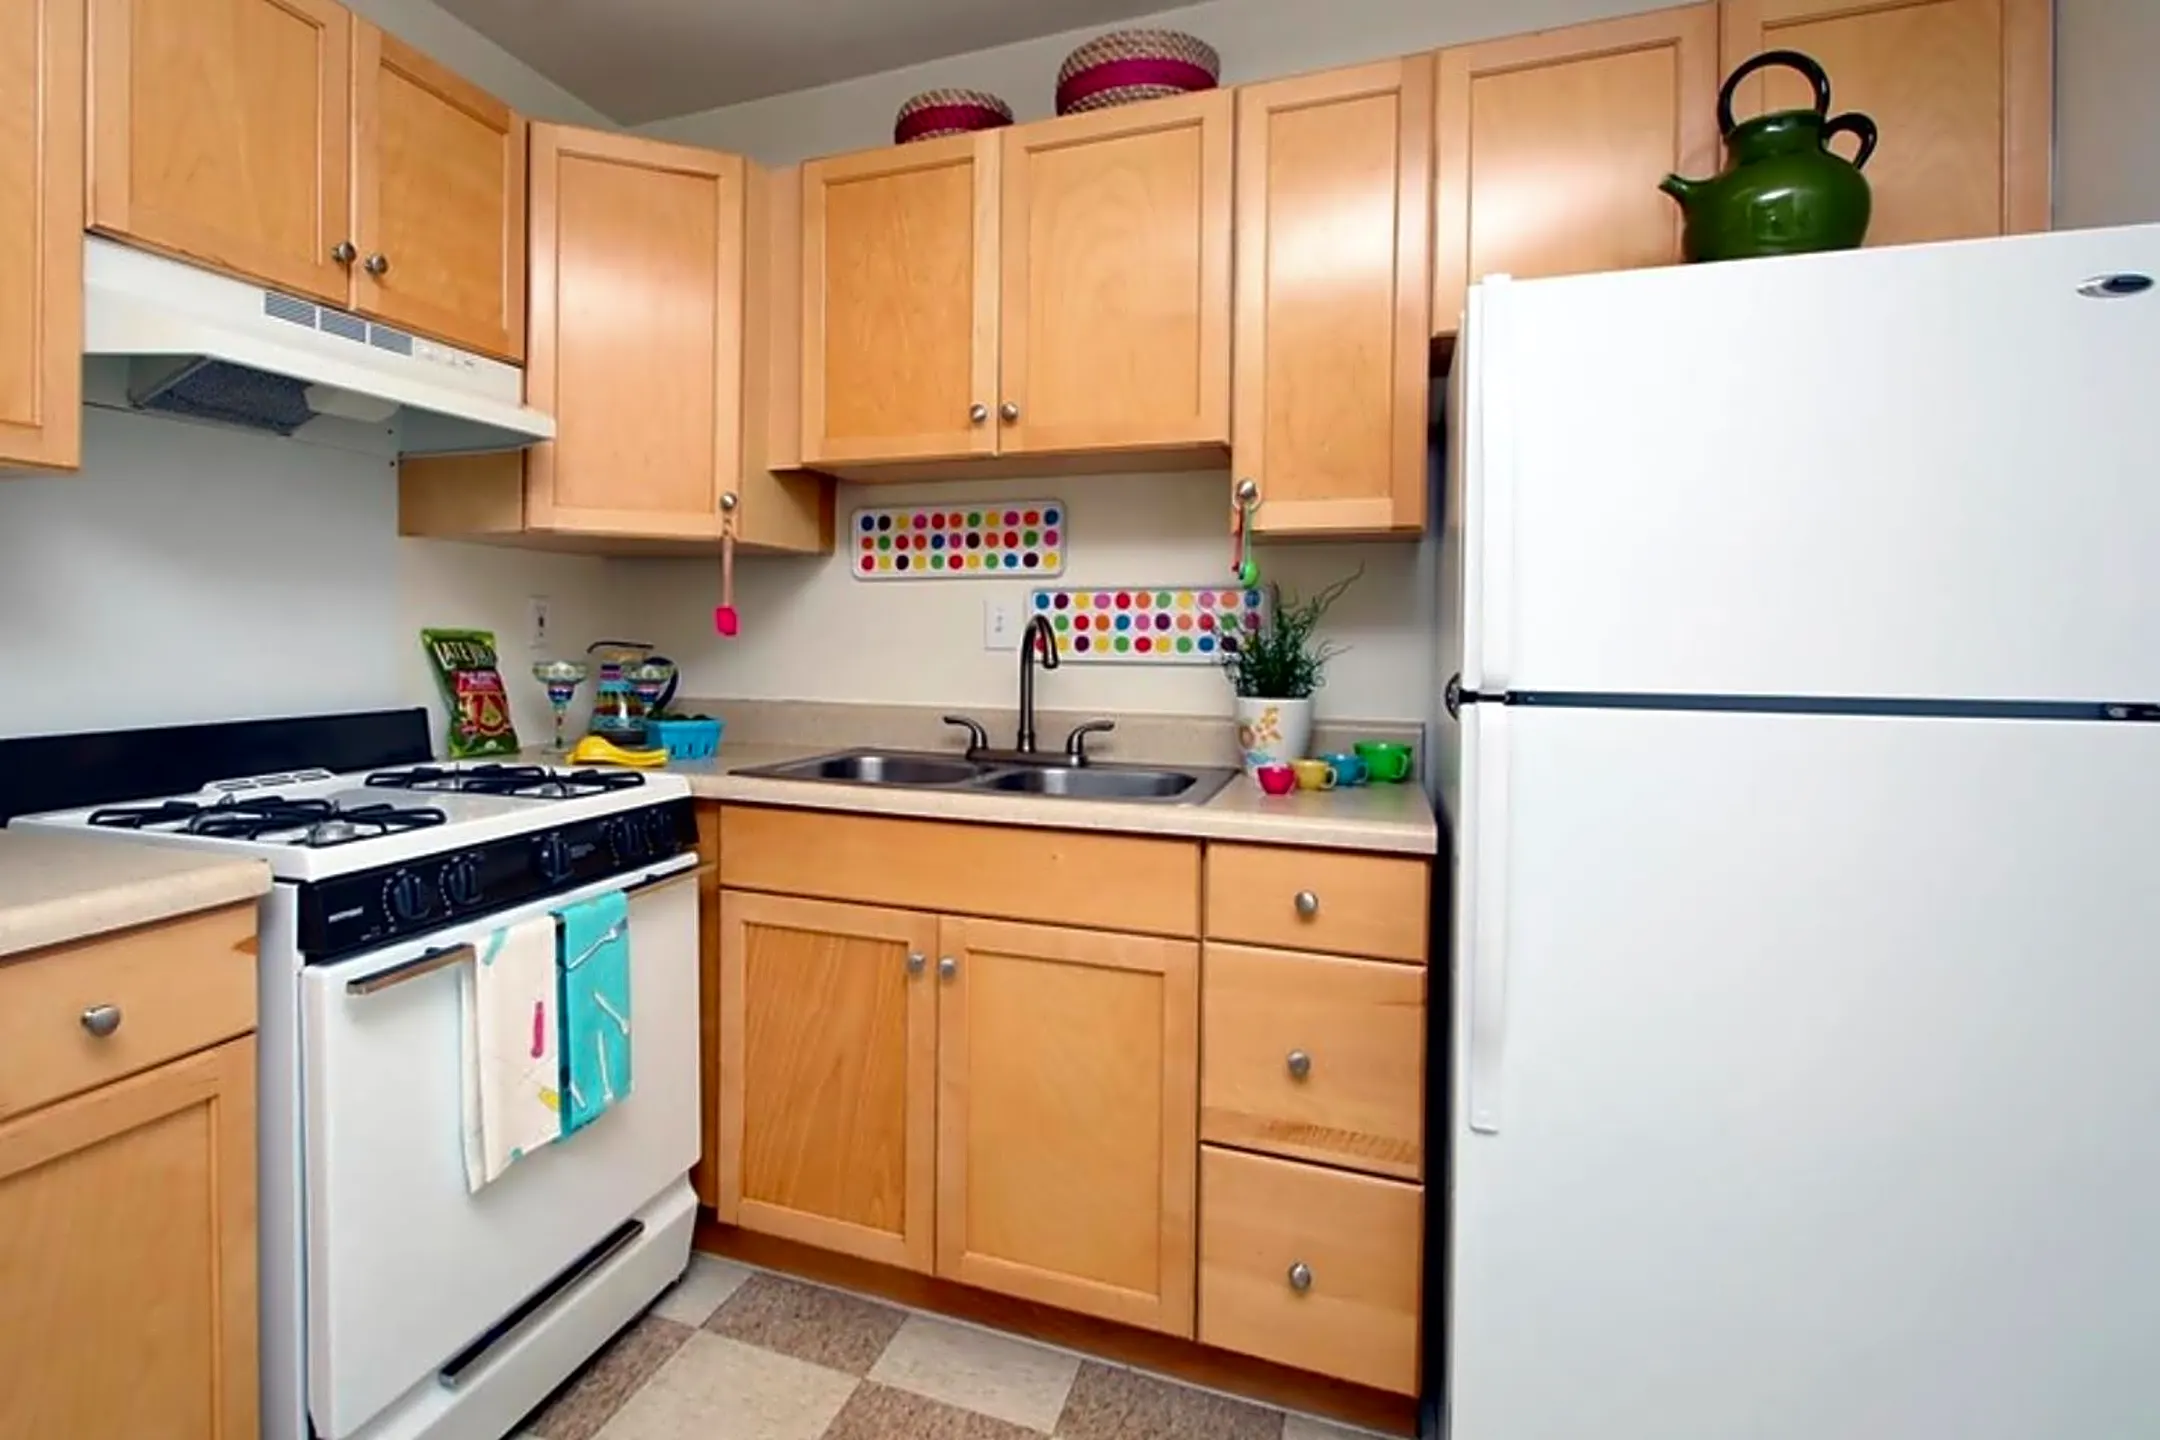 Kitchen - Serenity Park Apartments - Indianapolis, IN